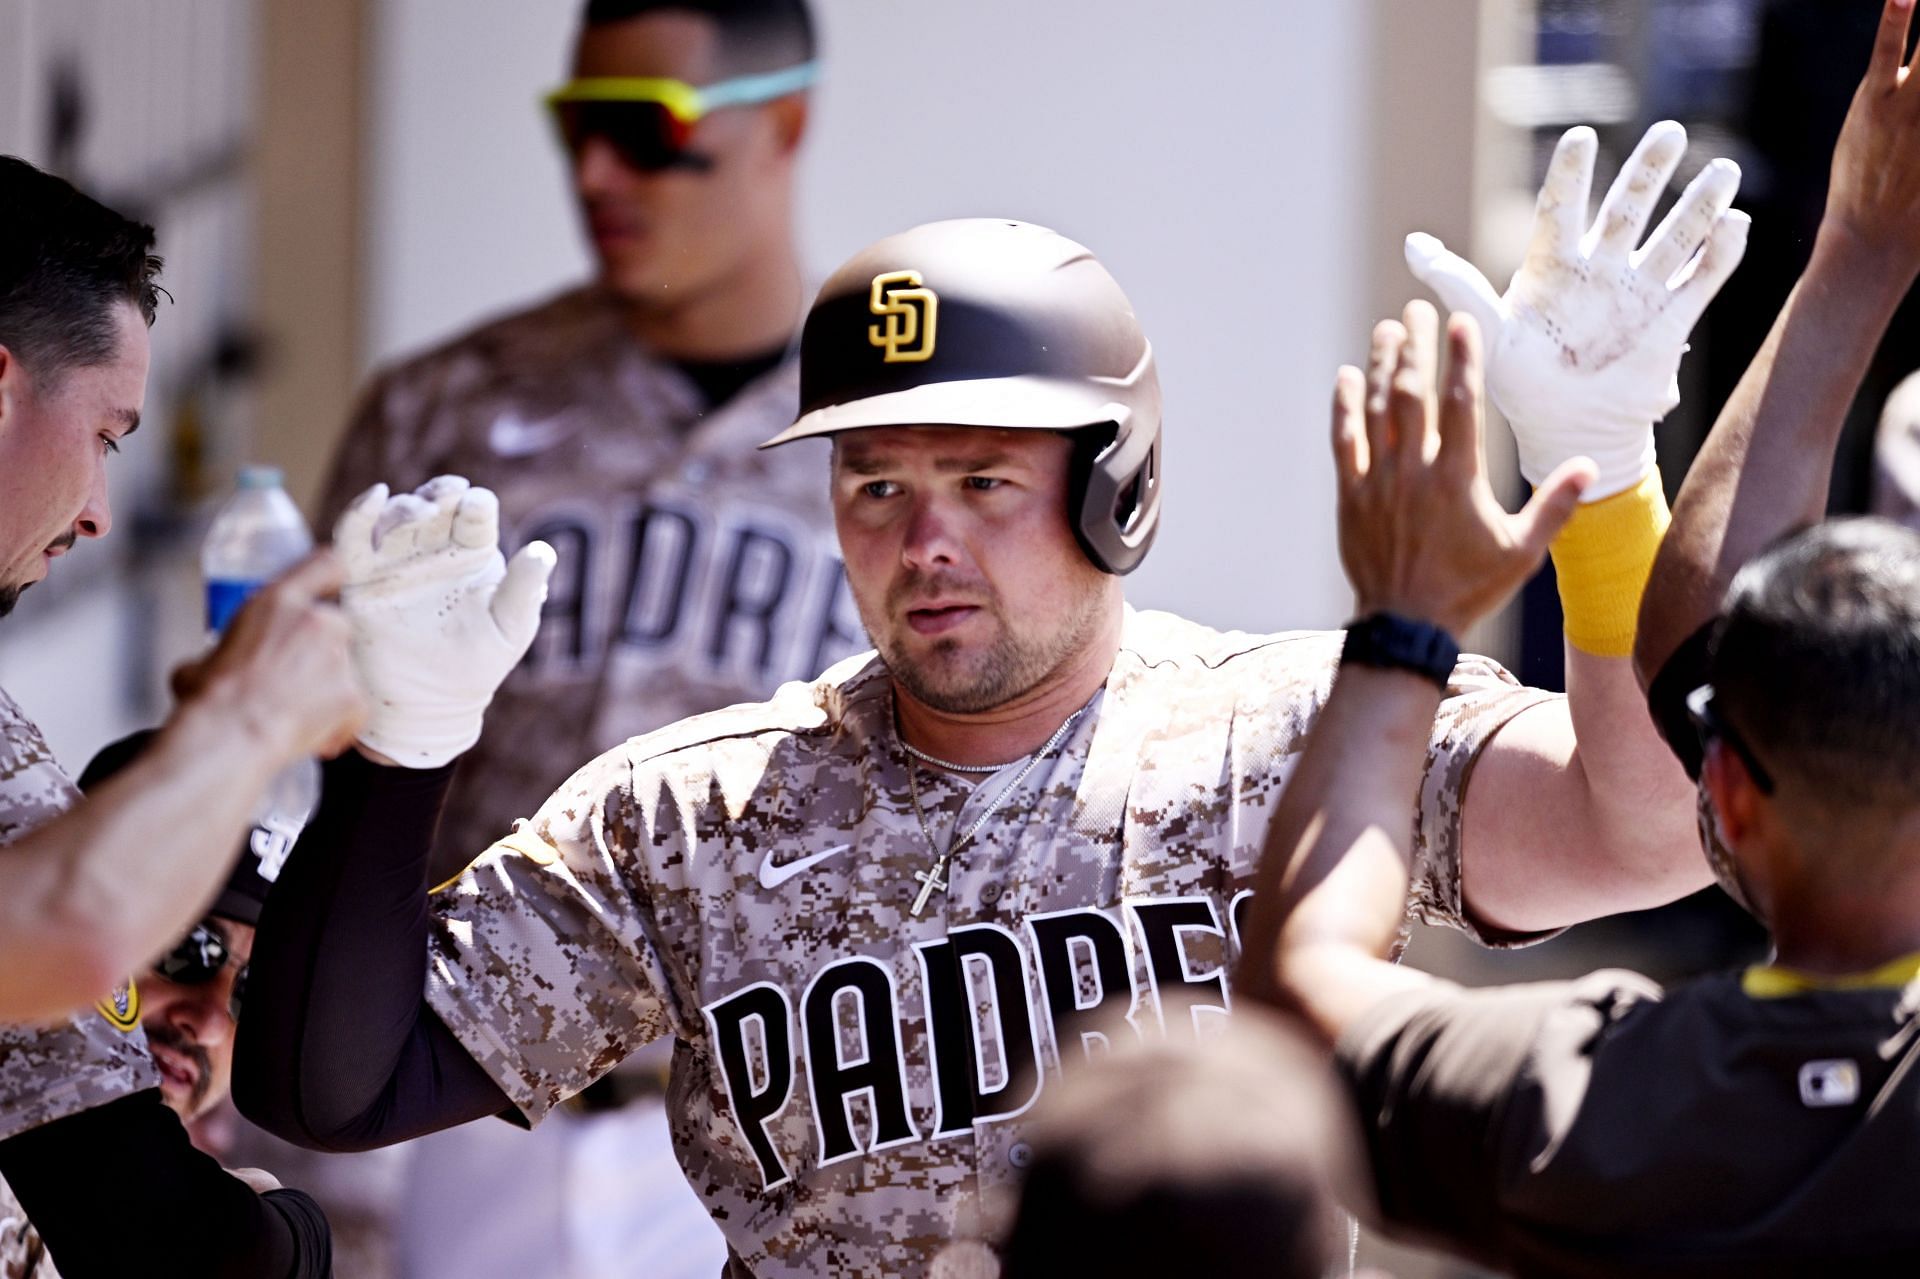 Luke Voit of the San Diego Padres celebrates a home run against the Colorado Rockies.